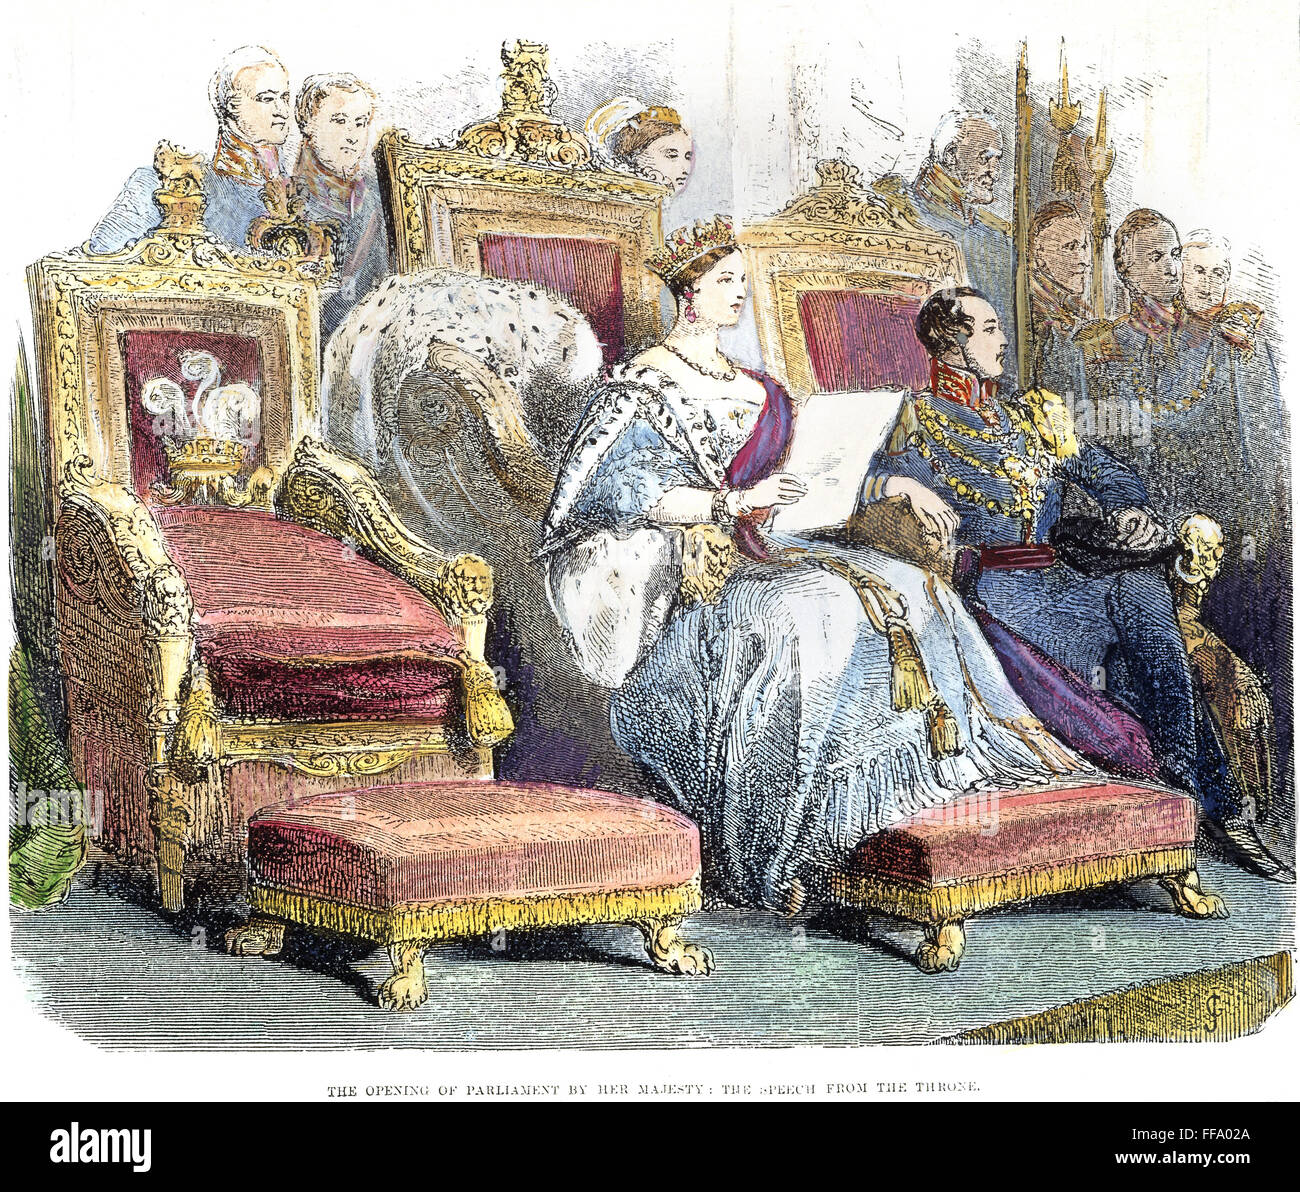 VICTORIA OF ENGLAND, 1846. /nQueen Victoria of England (1819-1901) opening Parliament in 1846. Contemporary English wood engraving. Stock Photo